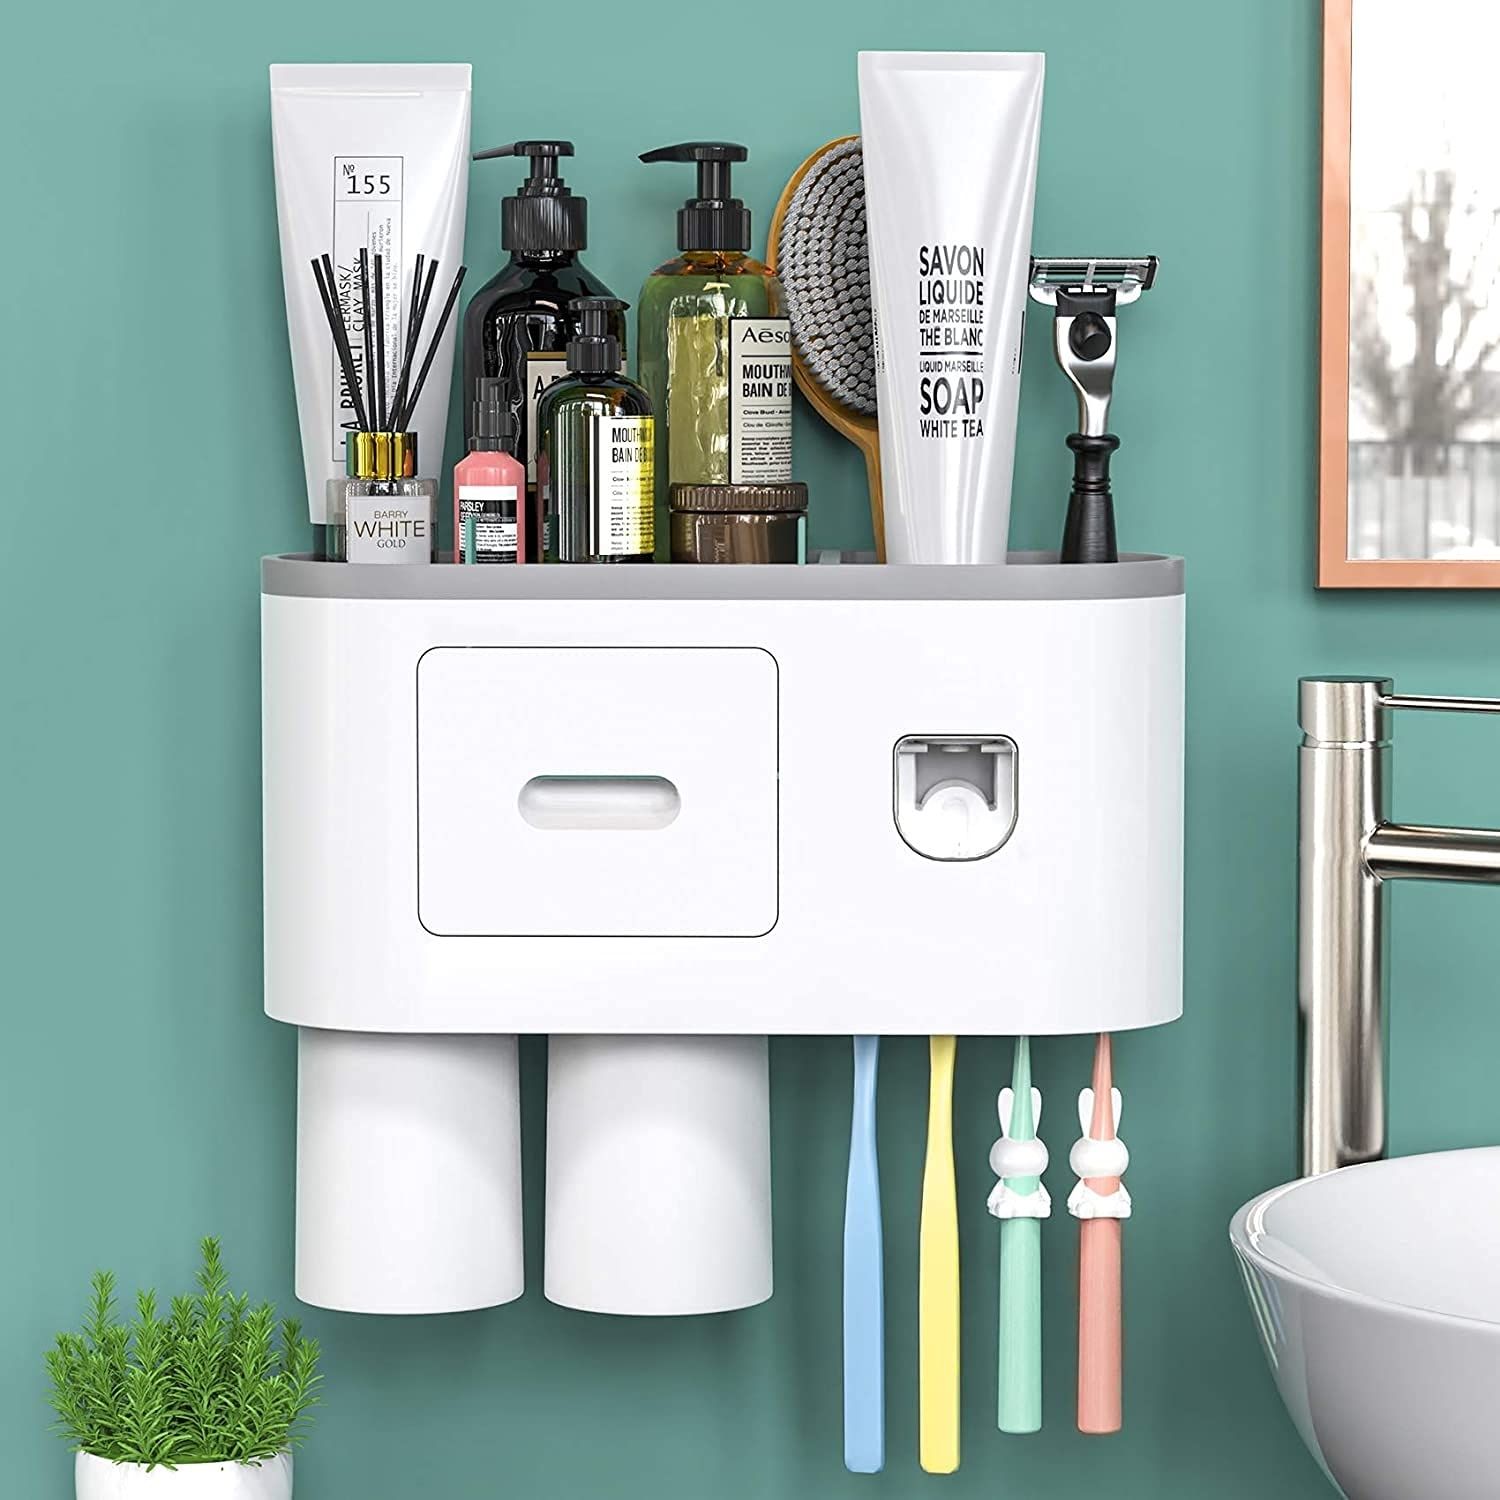 LXOICE Wall Mounted Toothbrush Holder Stand with Toothpaste Dispenser